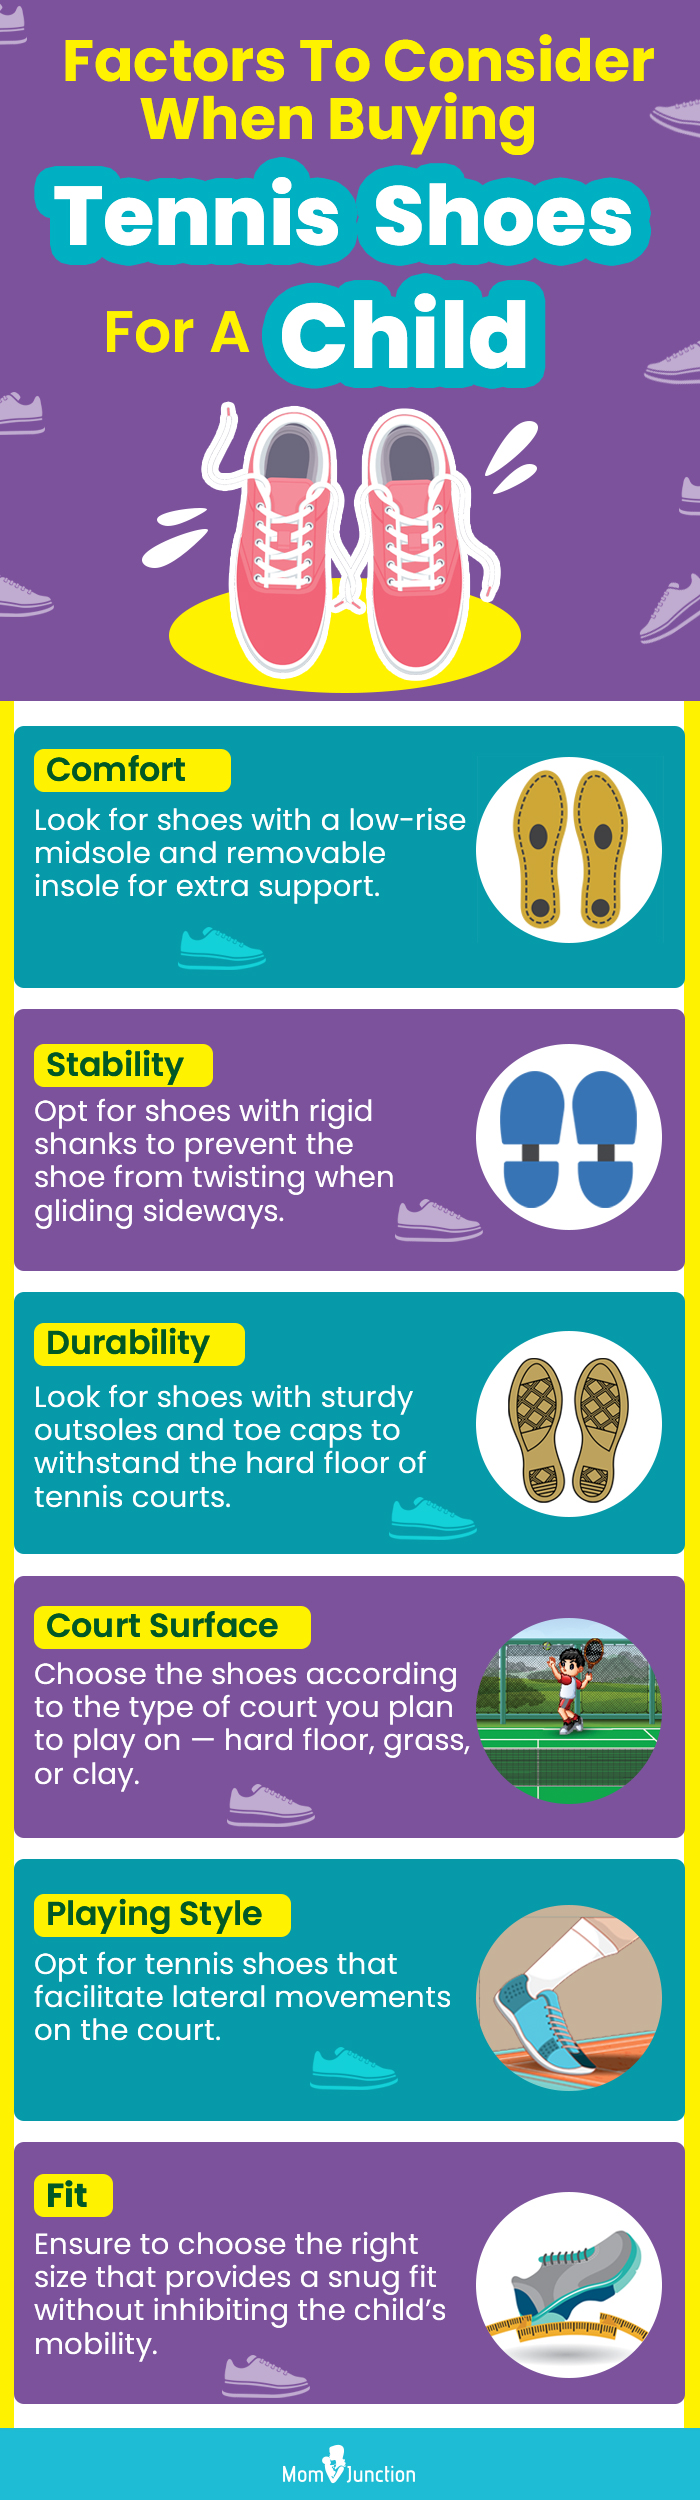 Factors To Consider When Buying Tennis Shoes For A Child (infographic)